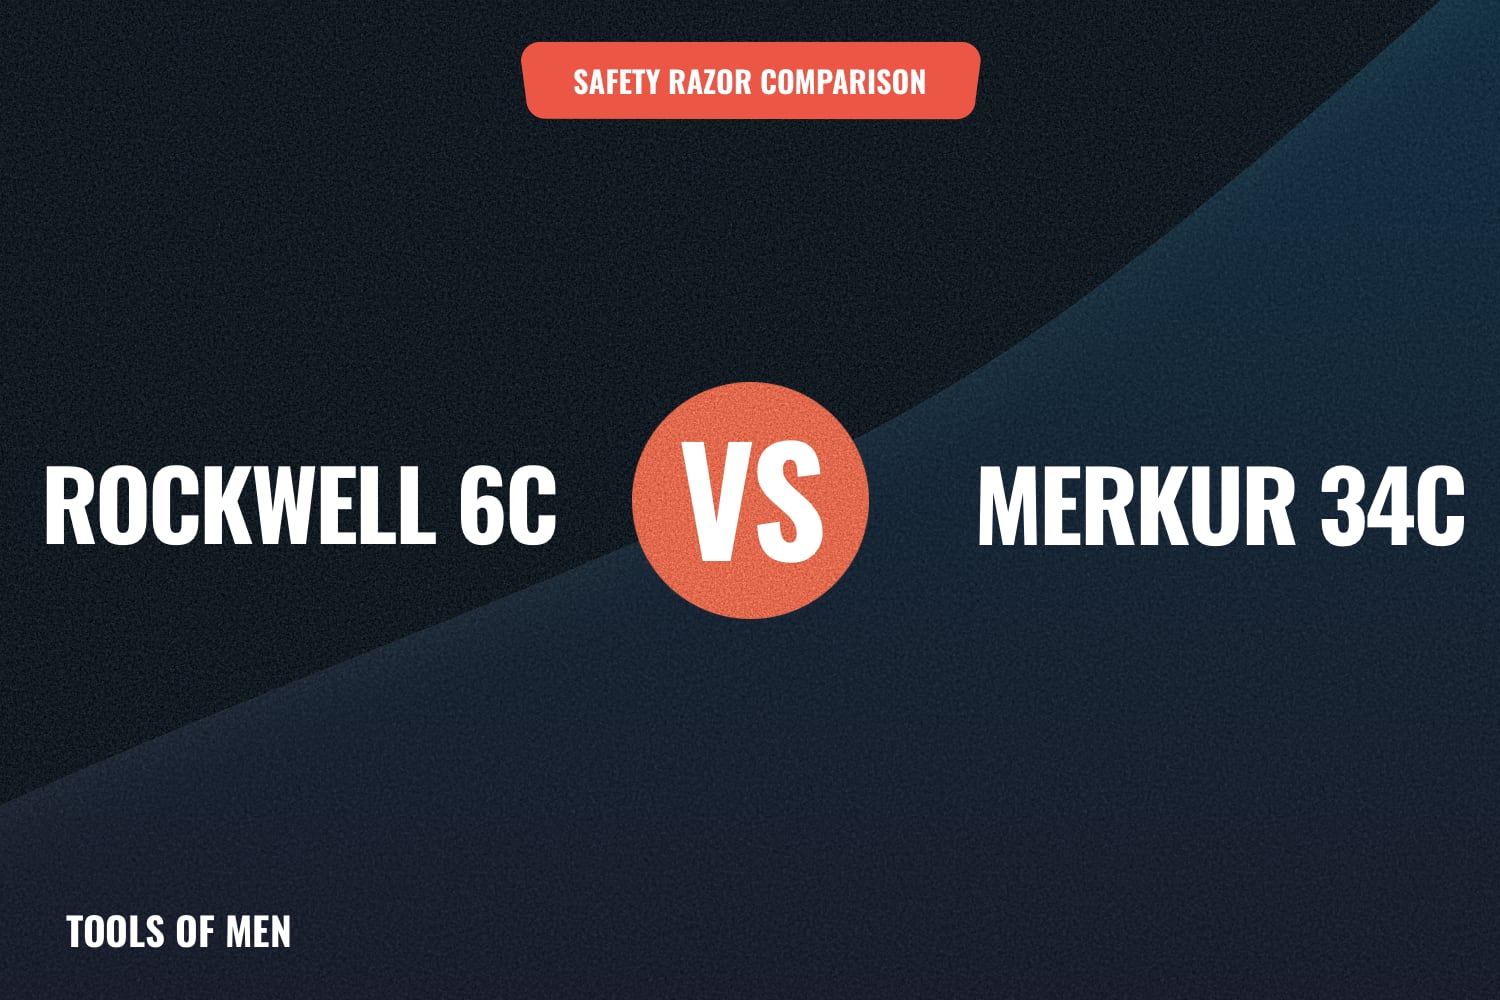 rockwell 6c and merkur 34c feature image